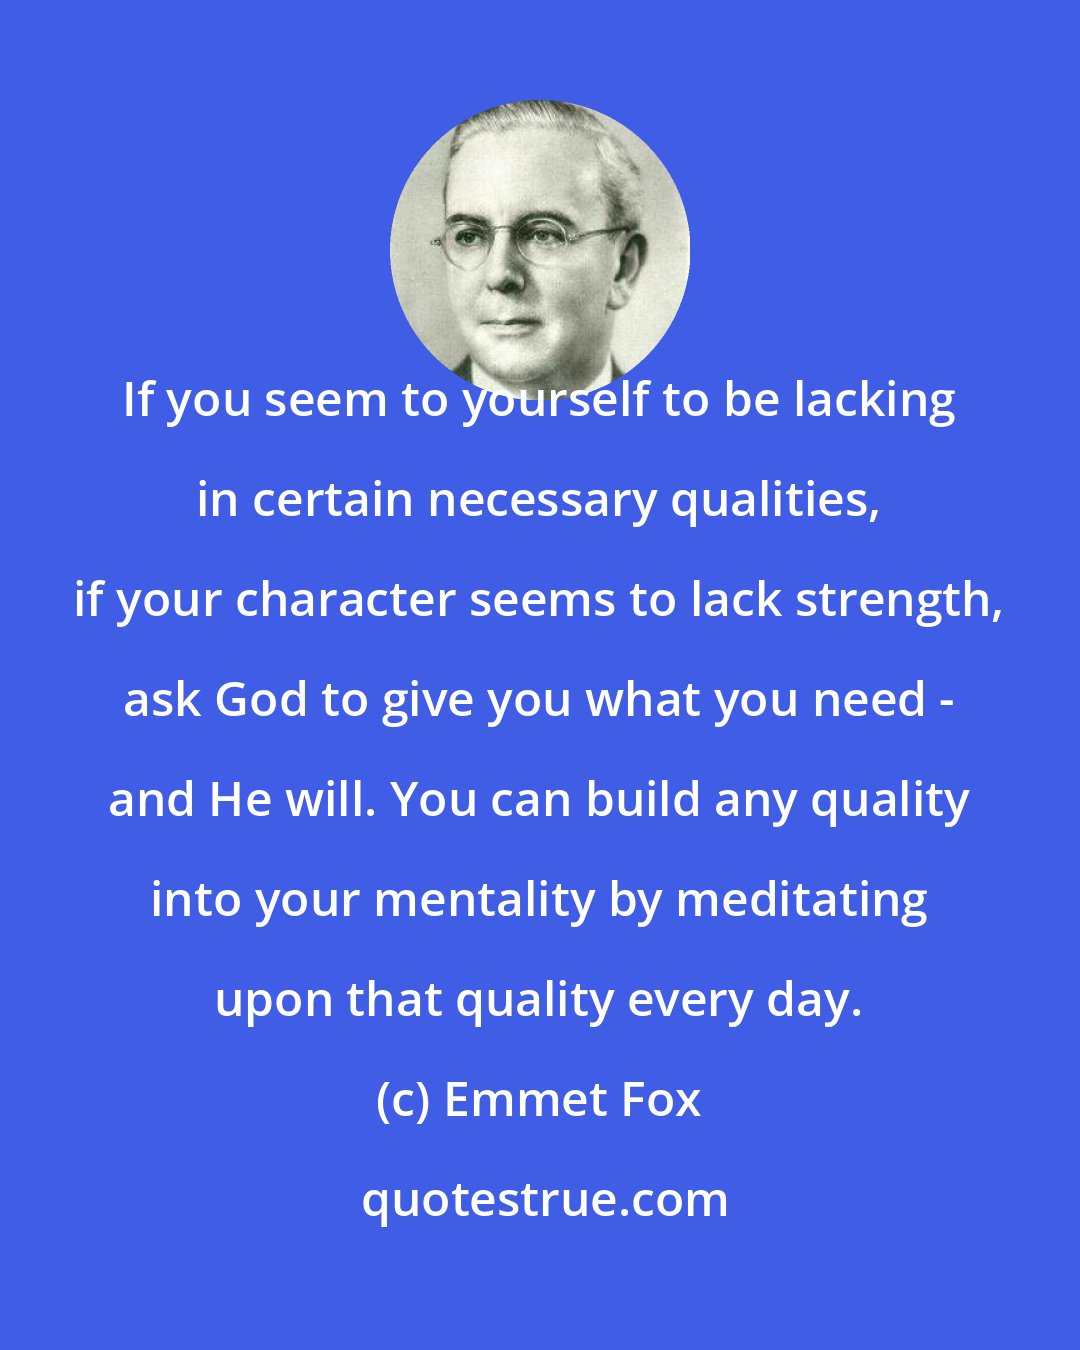 Emmet Fox: If you seem to yourself to be lacking in certain necessary qualities, if your character seems to lack strength, ask God to give you what you need - and He will. You can build any quality into your mentality by meditating upon that quality every day.